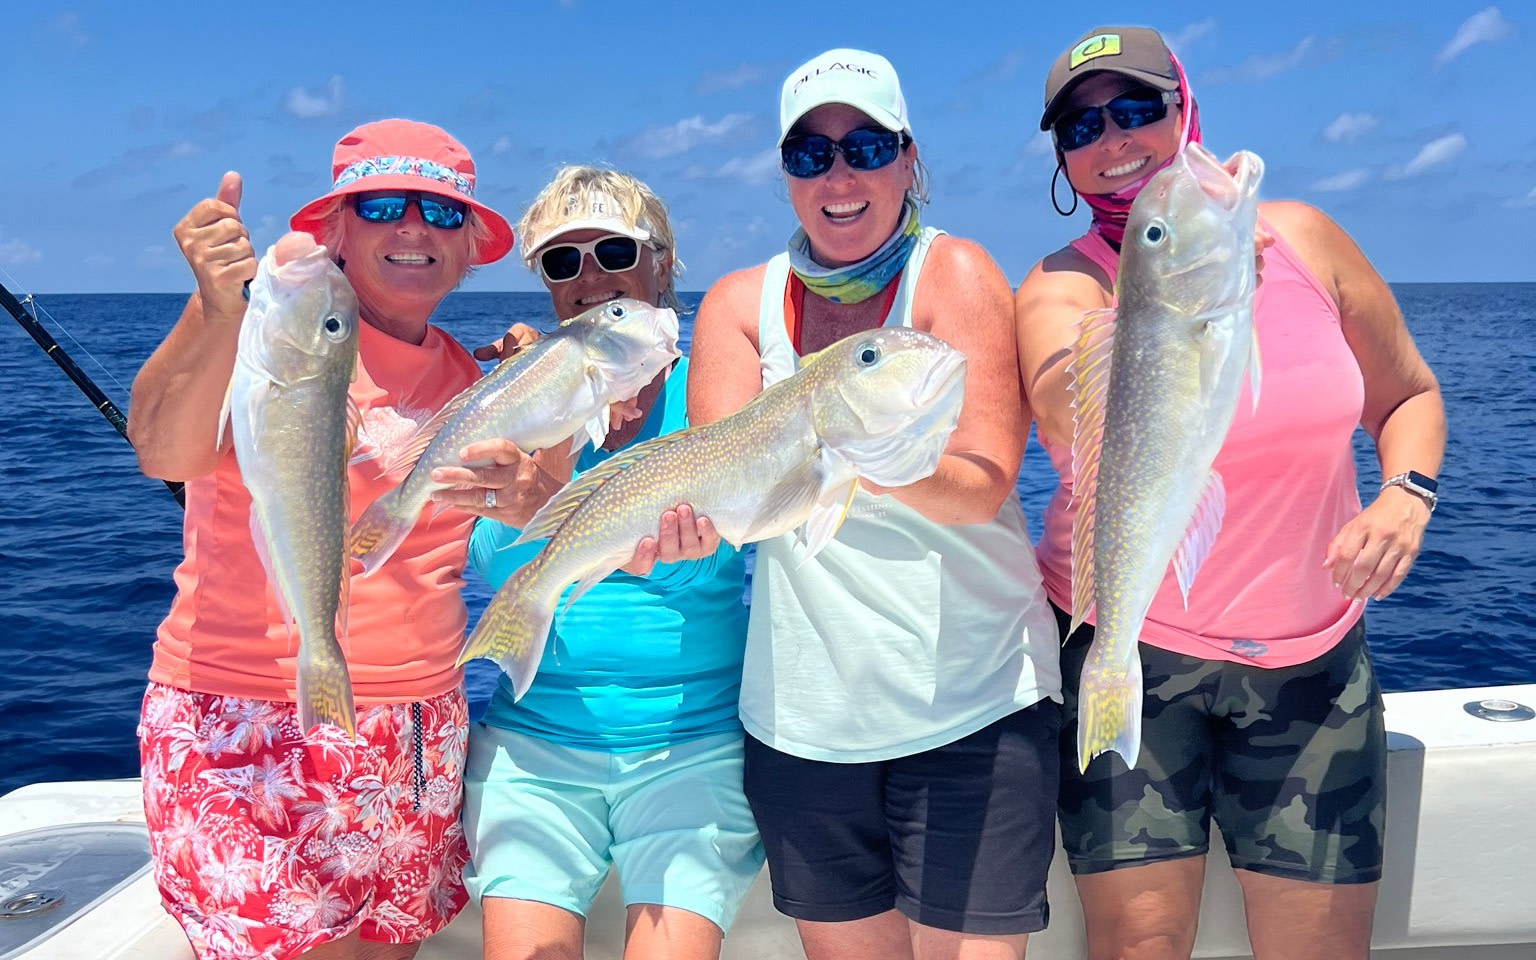 Experience the Sea-Sons 3/4 Day Fishing Charter: Book Tours & Activities at